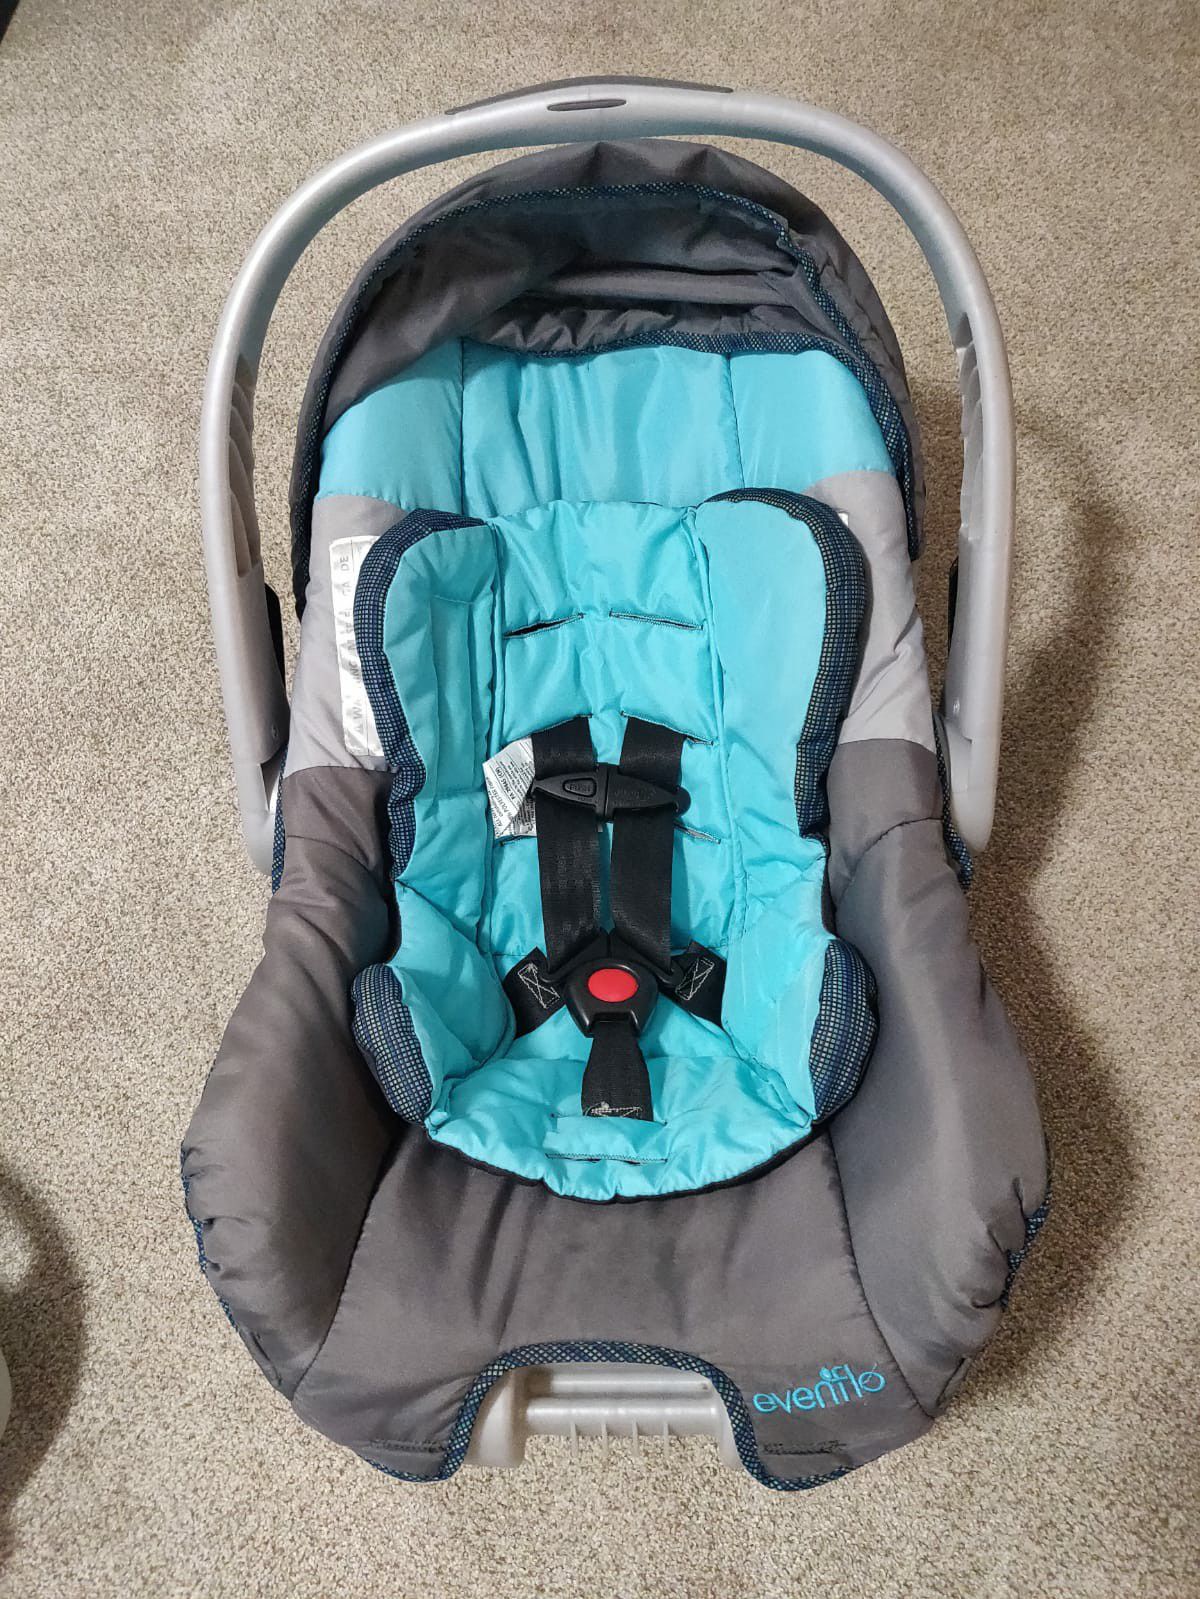 Evenflo car seat in good condition normal wear and tear